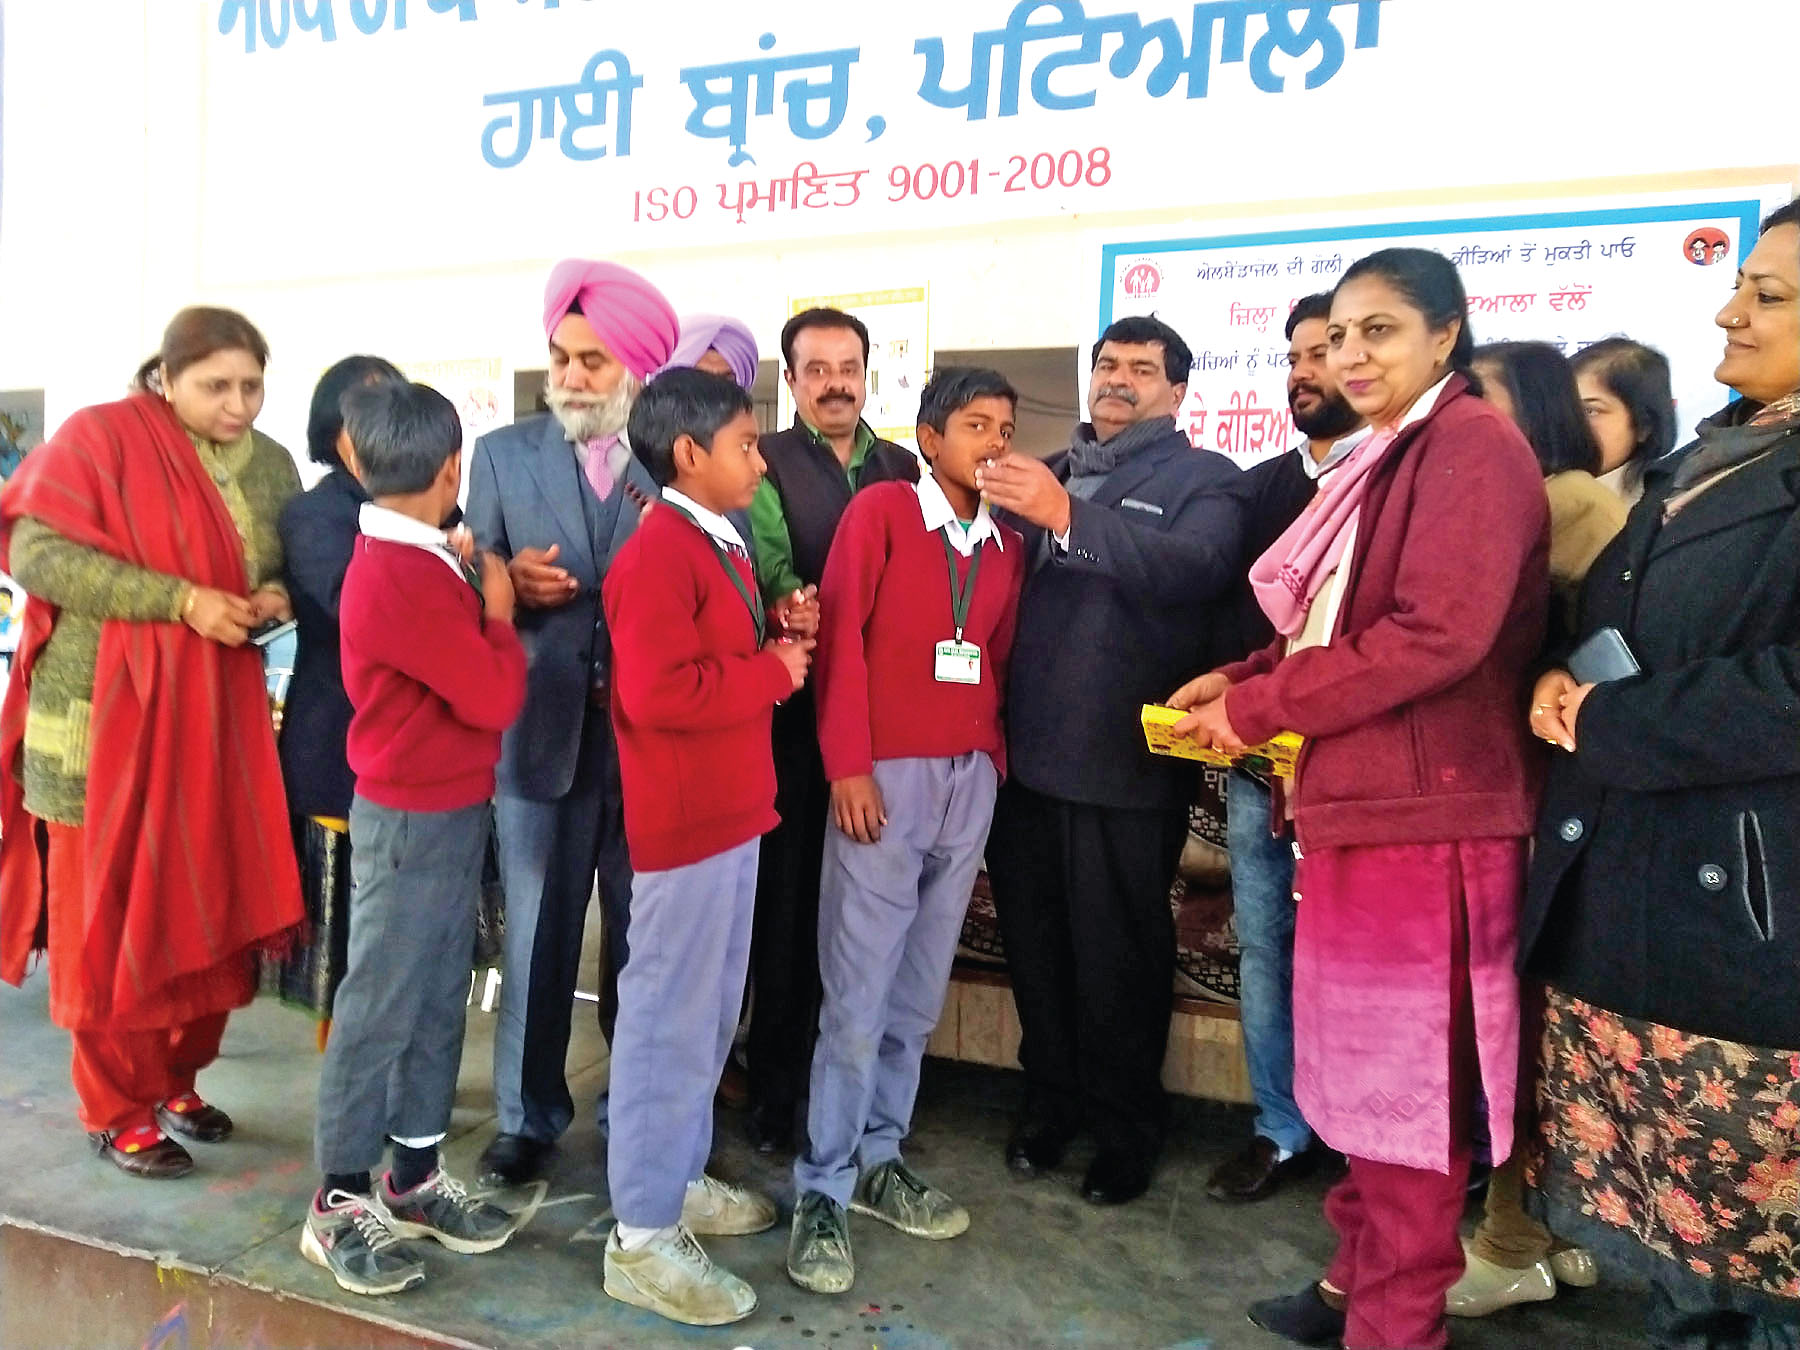 Good health is important for good education: Dr. Malhotra